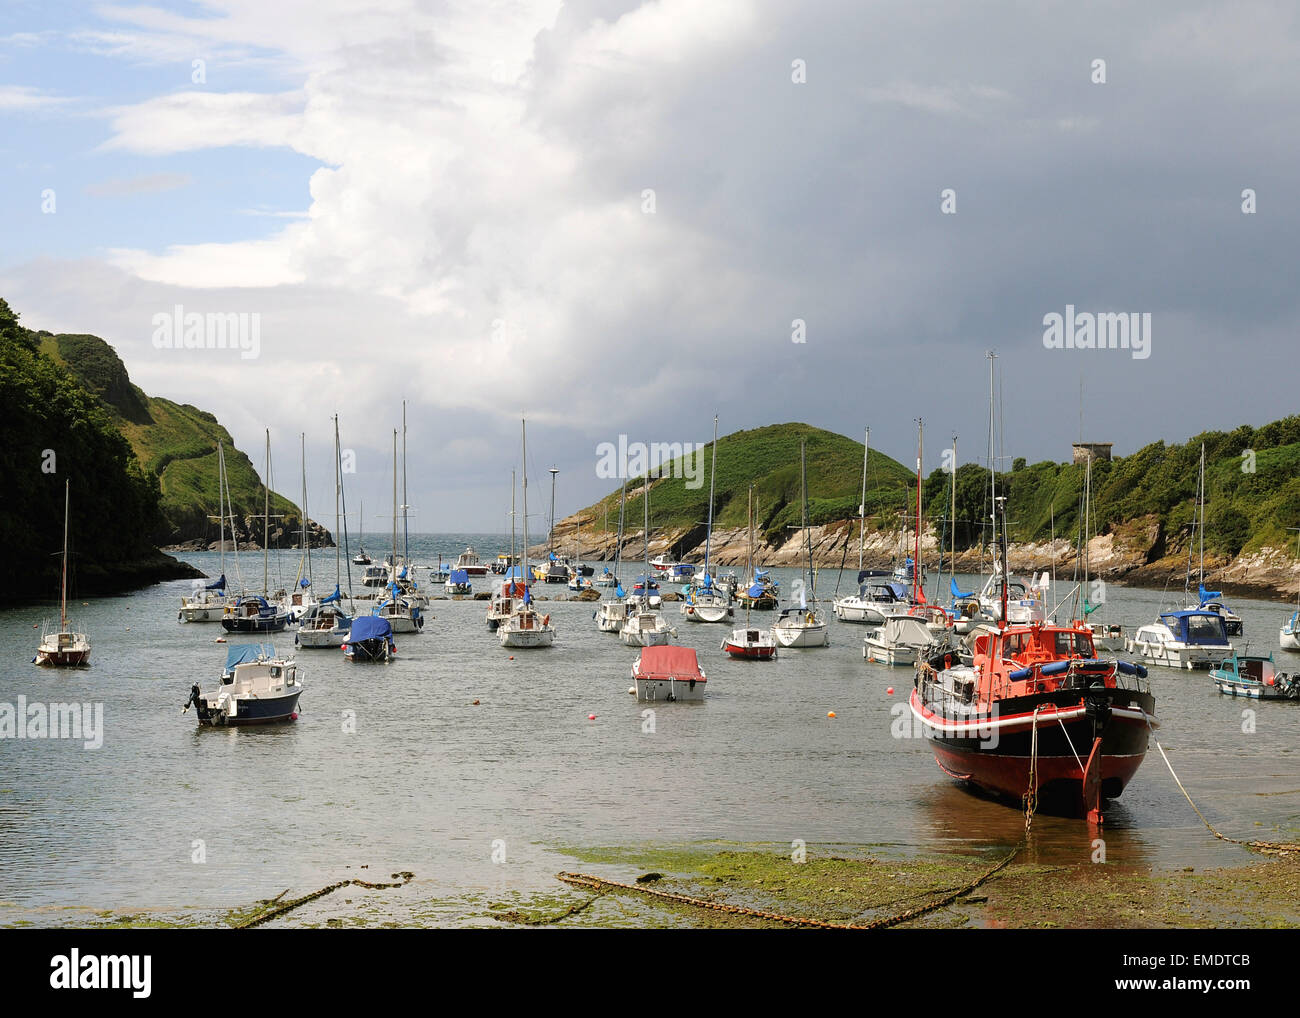 Watermouth Cove Near Ilfracombe Watermouth Harbour Stock Photo